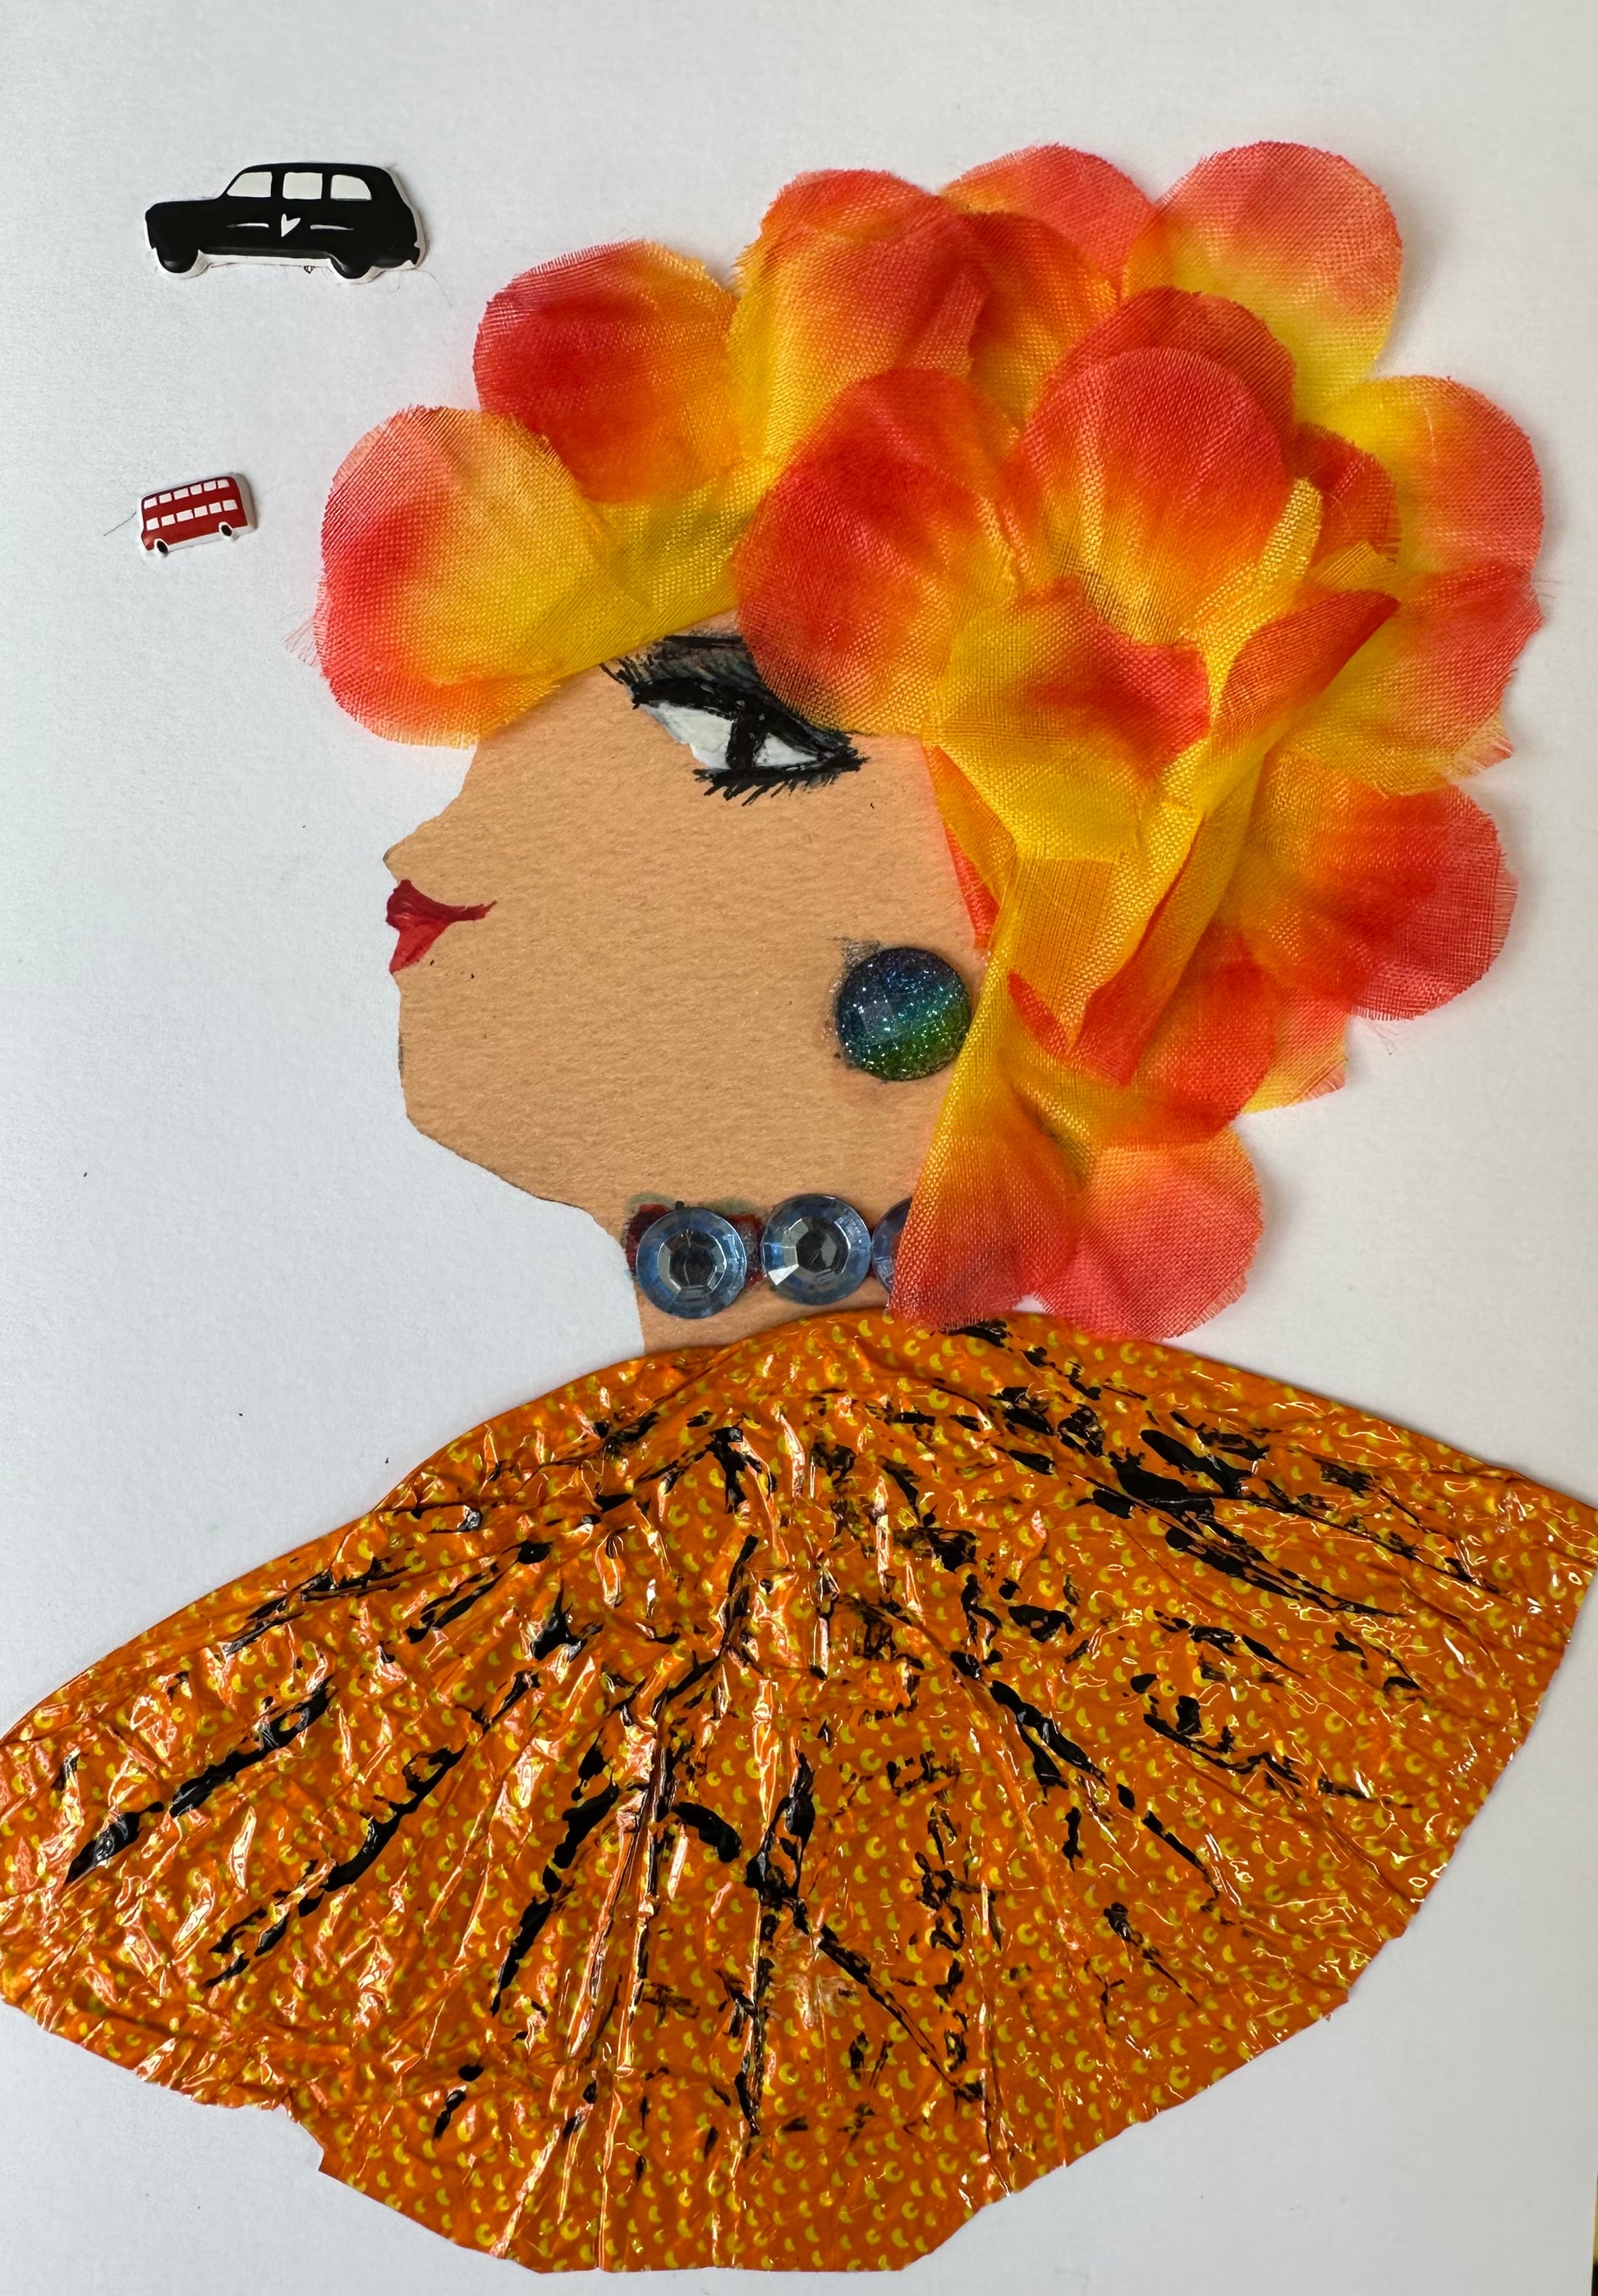 This handmade card of Kilburn Kelly is of a woman dressed in an orange blouse with black stripes and small yellow dots. Her hair is bright orange and yellow ombre petals. Her outfit is completed with blue gemstone jewellery. Finally, there is a black car in the left corner of the card.